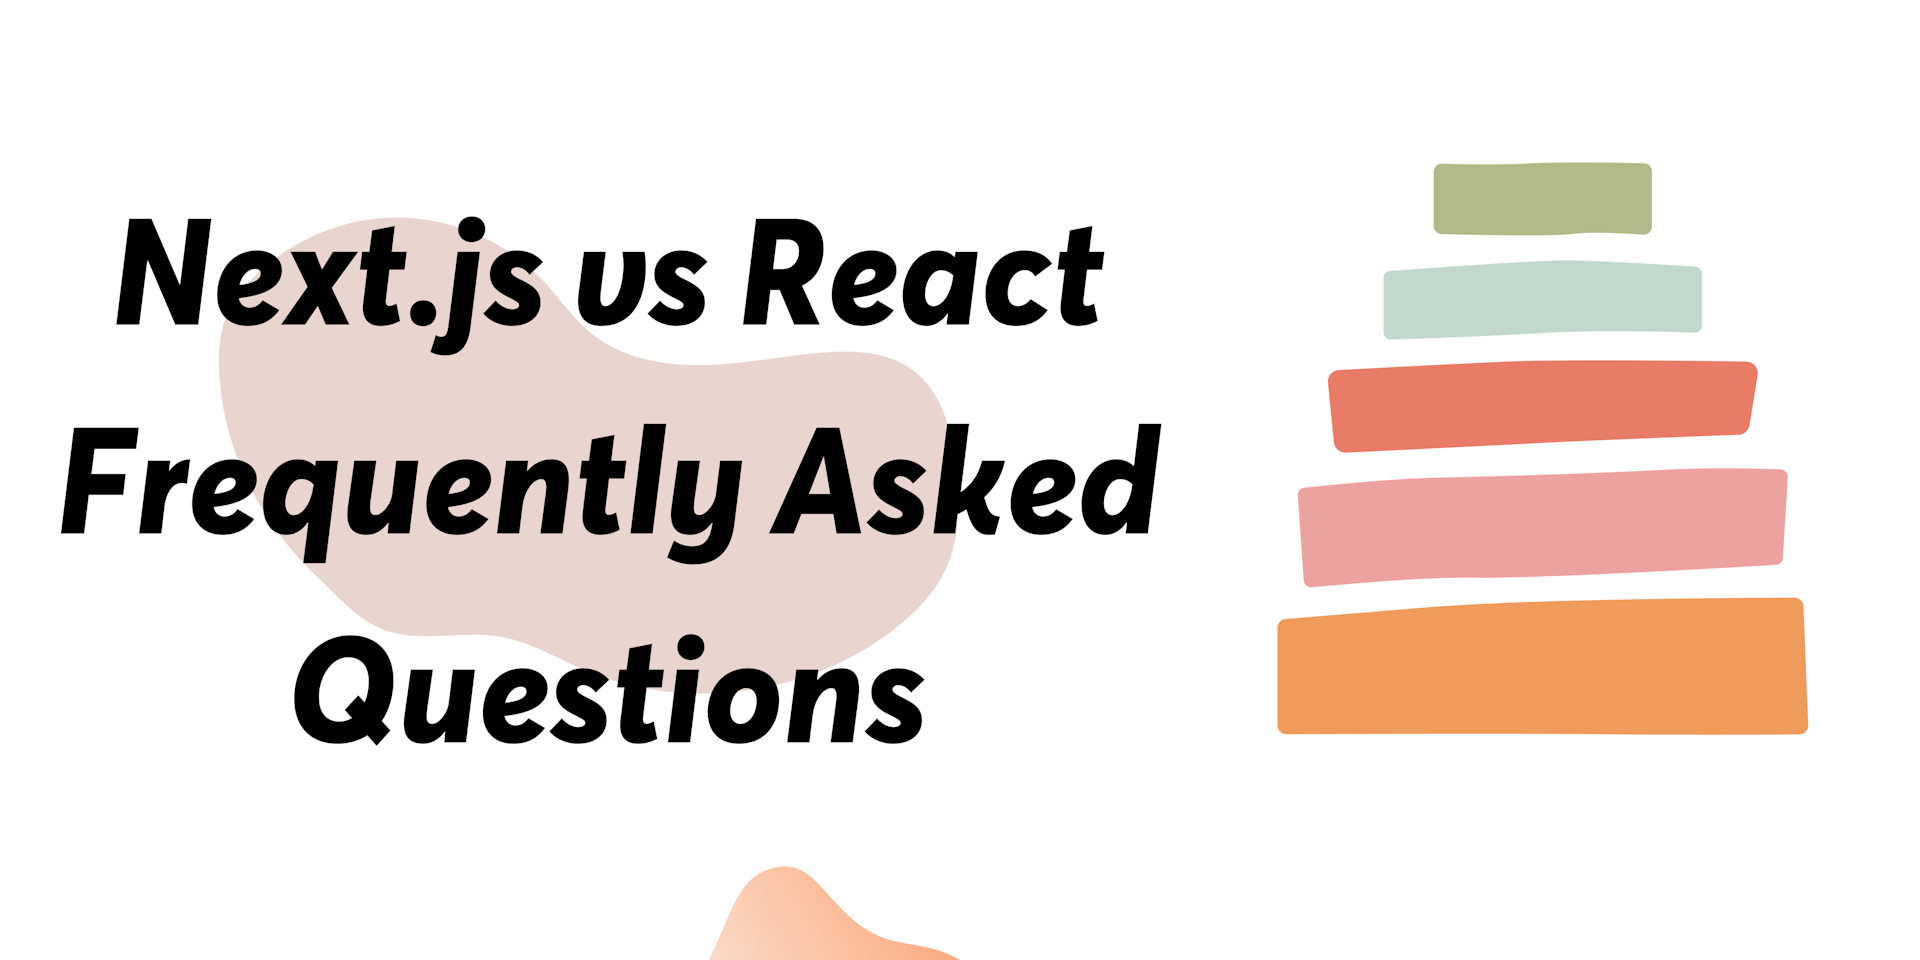 Next.js vs React - Frequently Asked Questions